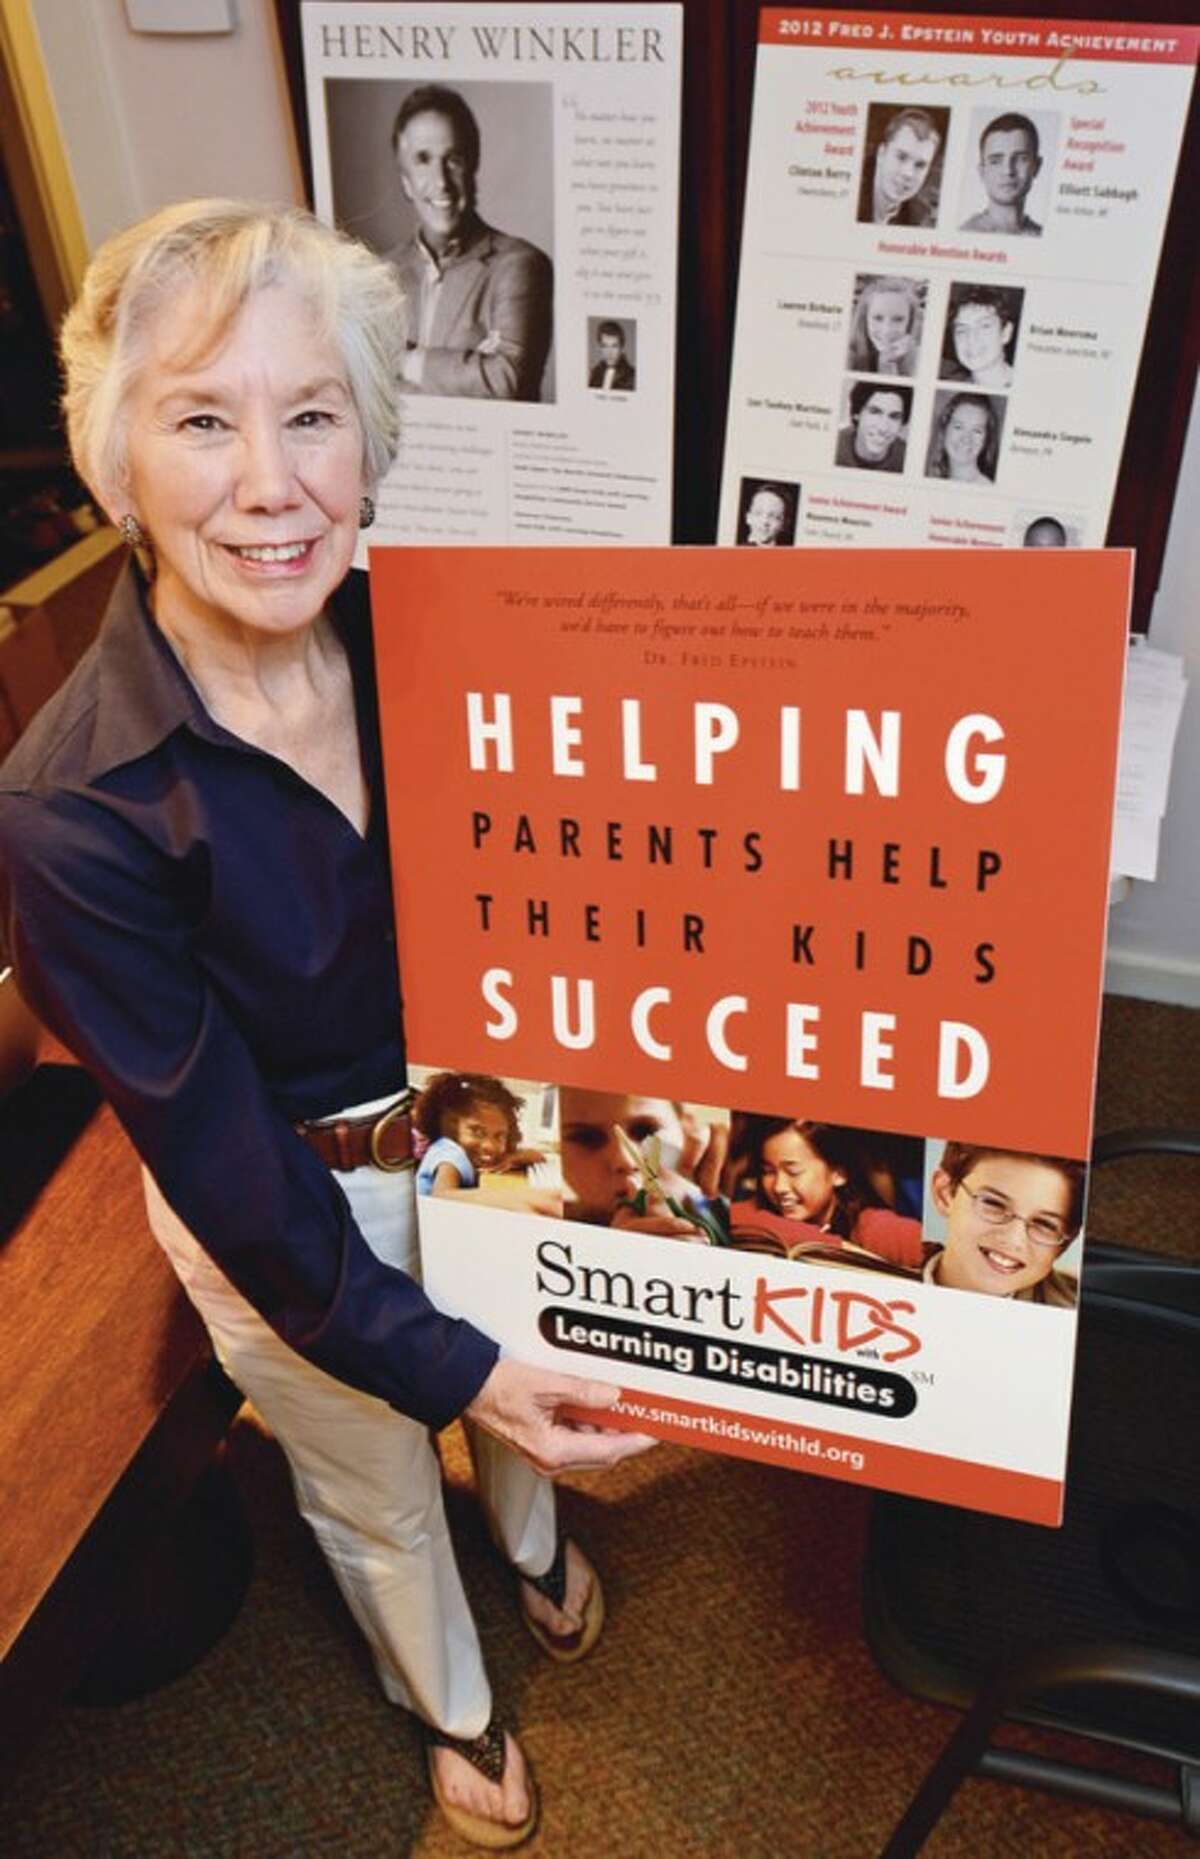 Hour photo / Erik Trautmann Jane Ross founded Smart Kids, a nonprofit organization in Westport dedicated to helping children with learning disabilities succeed.